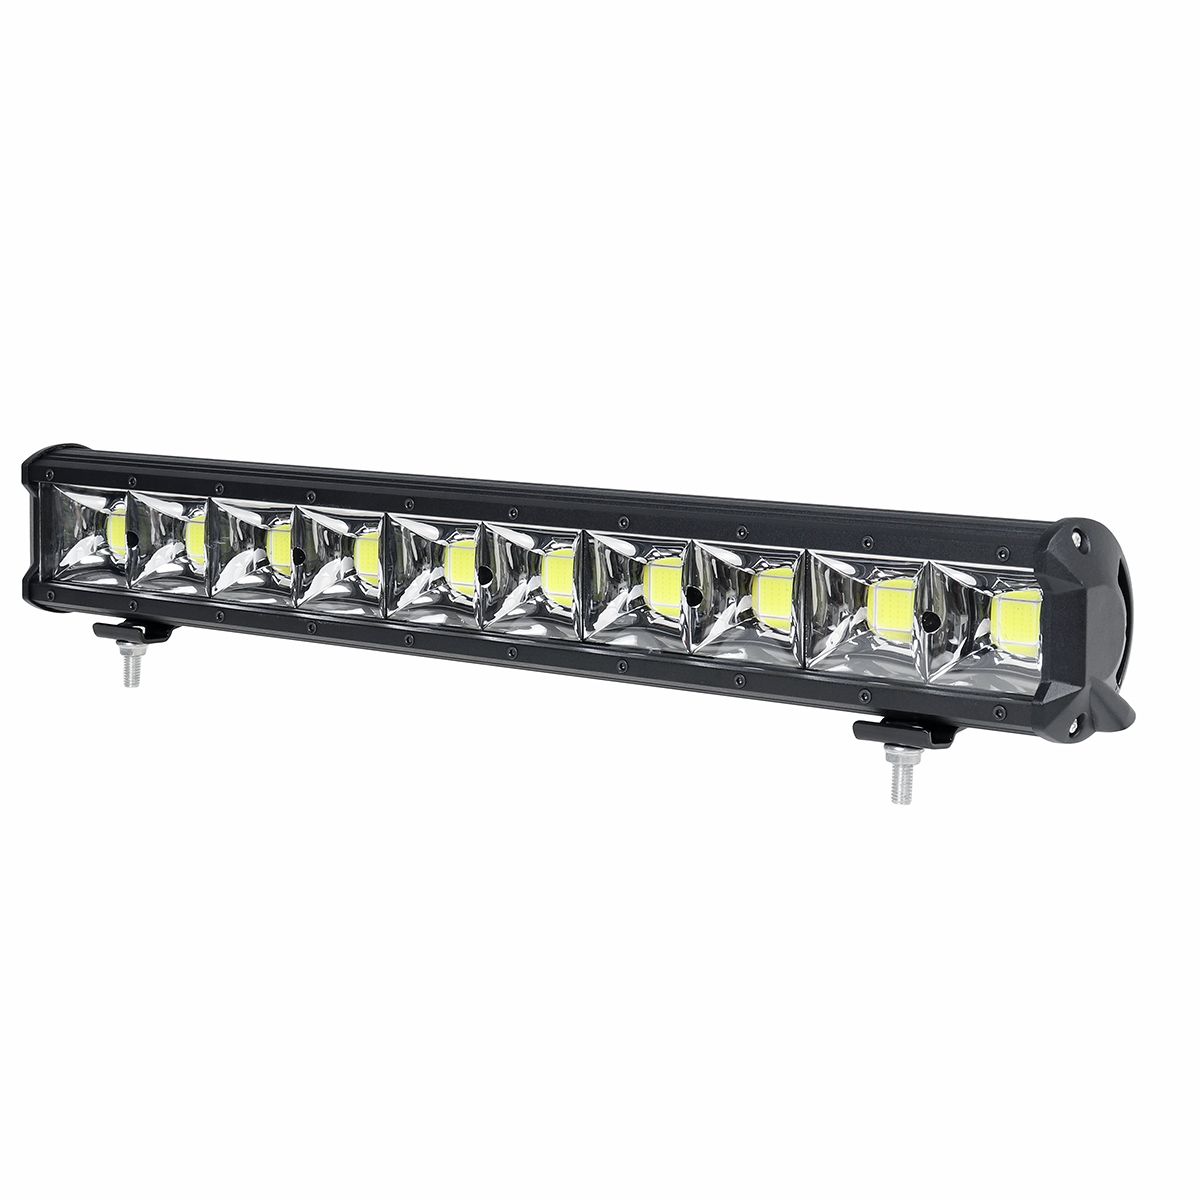 5-Inch-9-Inch-13-Inch-22-Inch-COB-LED-Work-Light-Bar-Waterproof-6000K-Universal-For-Car-Home-1665885